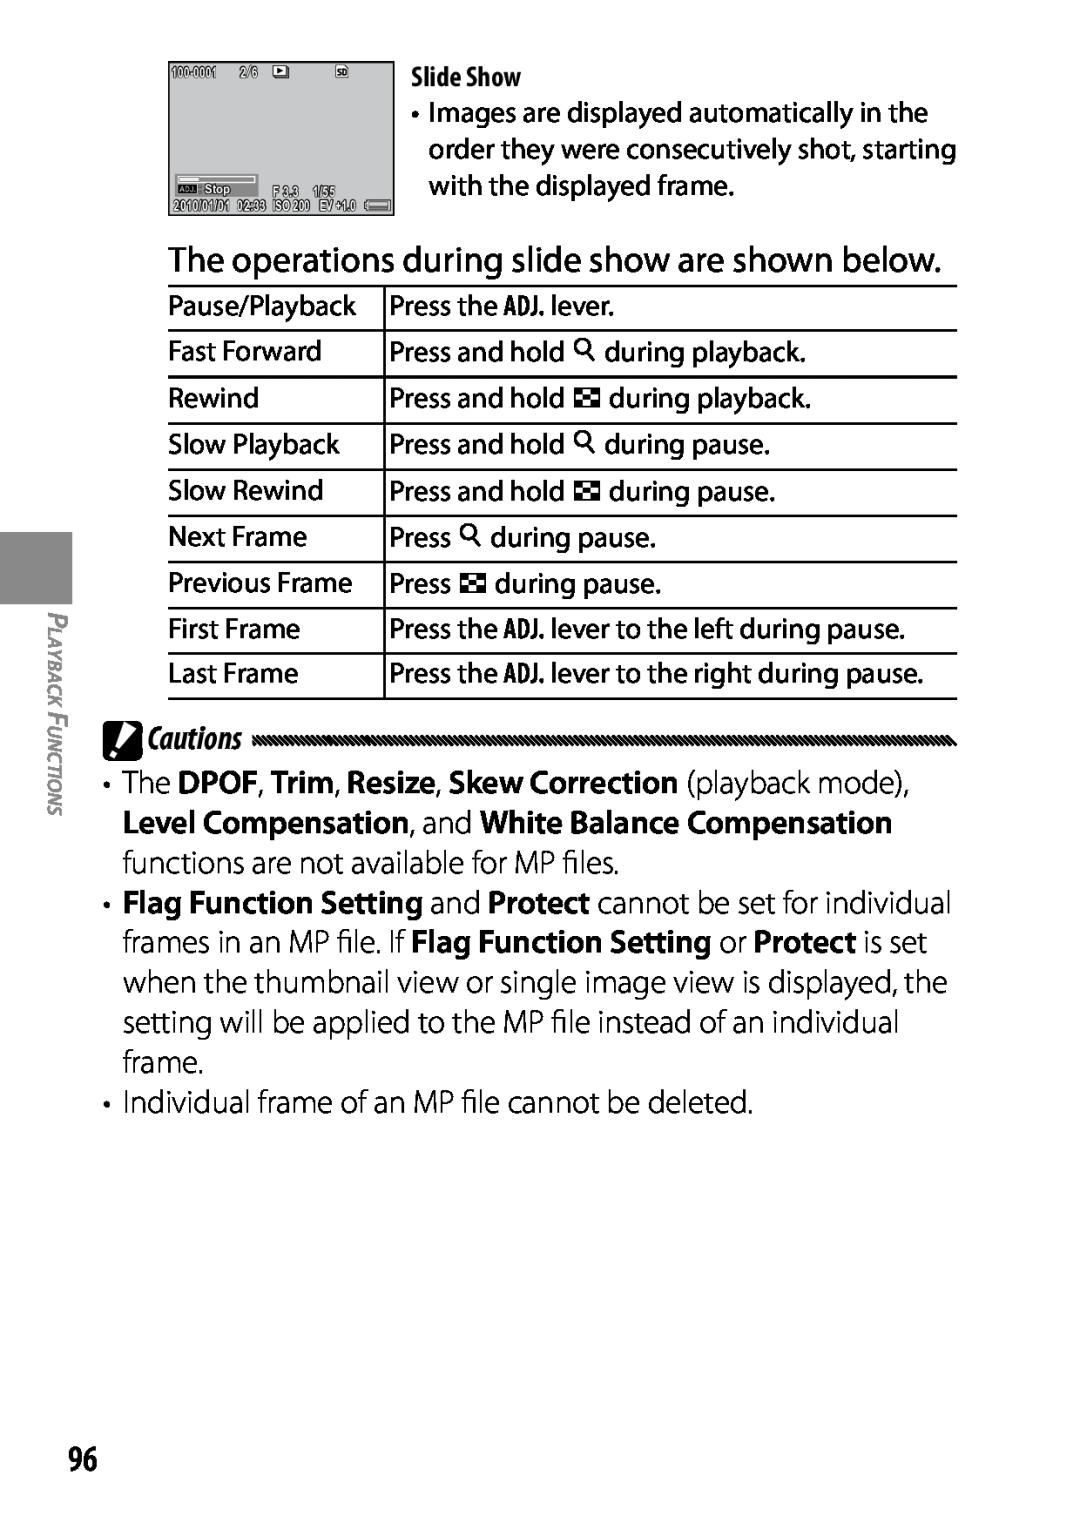 Ricoh GXR The operations during slide show are shown below, Cautions, Individual frame of an MP file cannot be deleted 